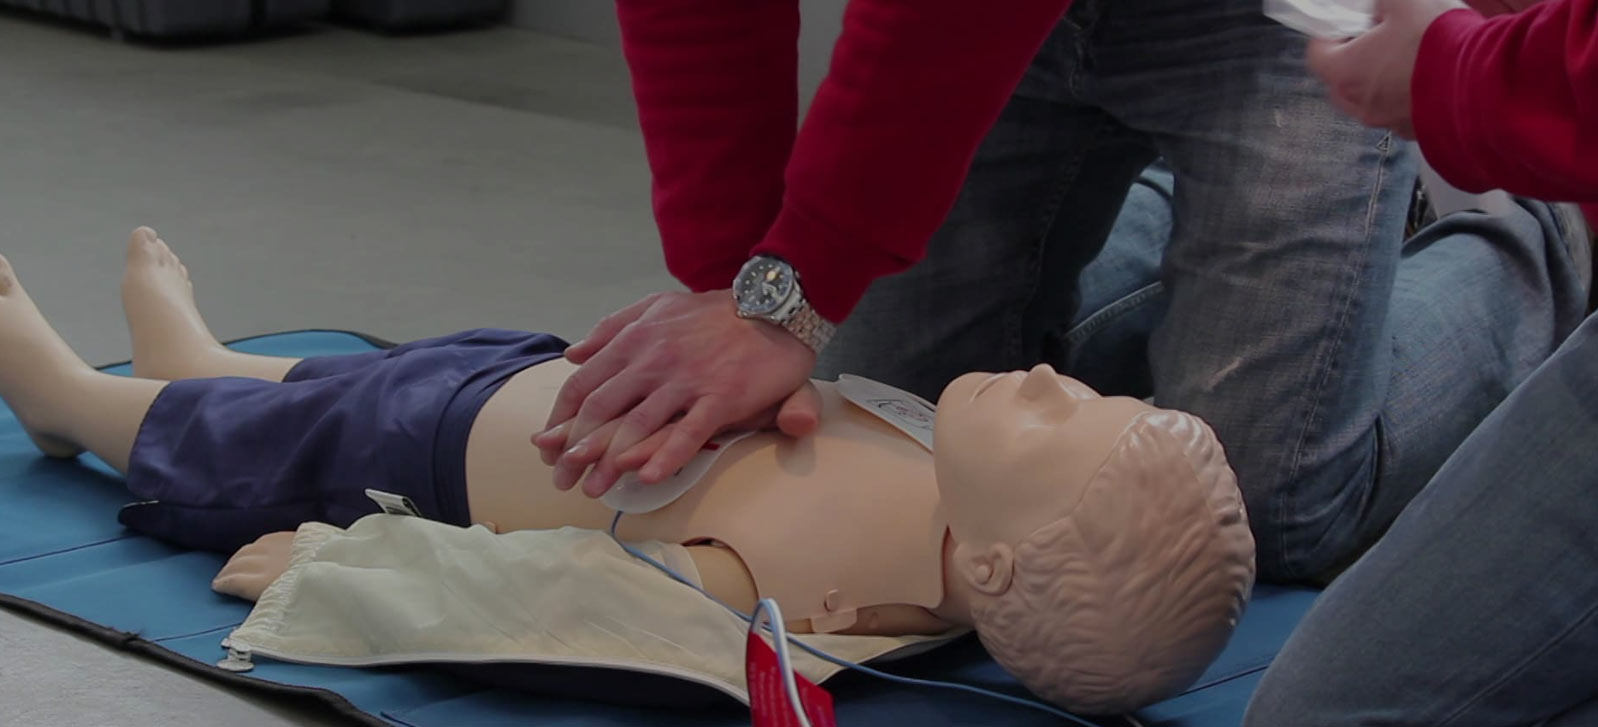 Online CPR Certification Course